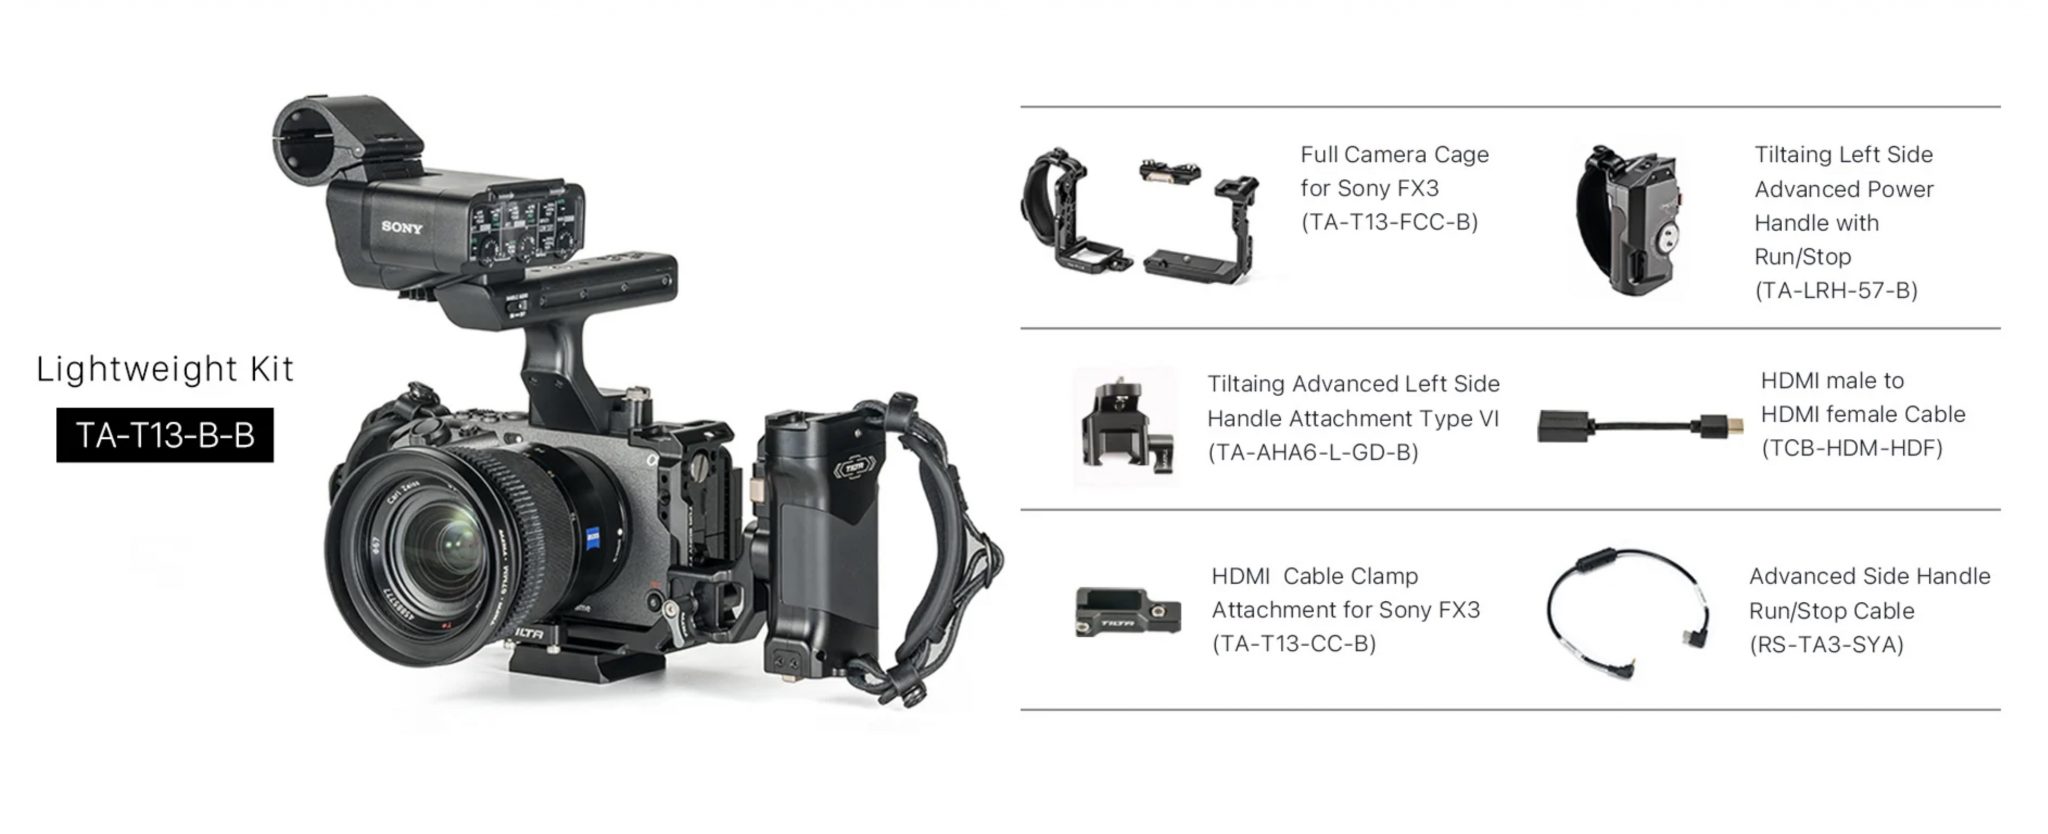 Tilta Camera Cages for the Sony FX3 - Newsshooter